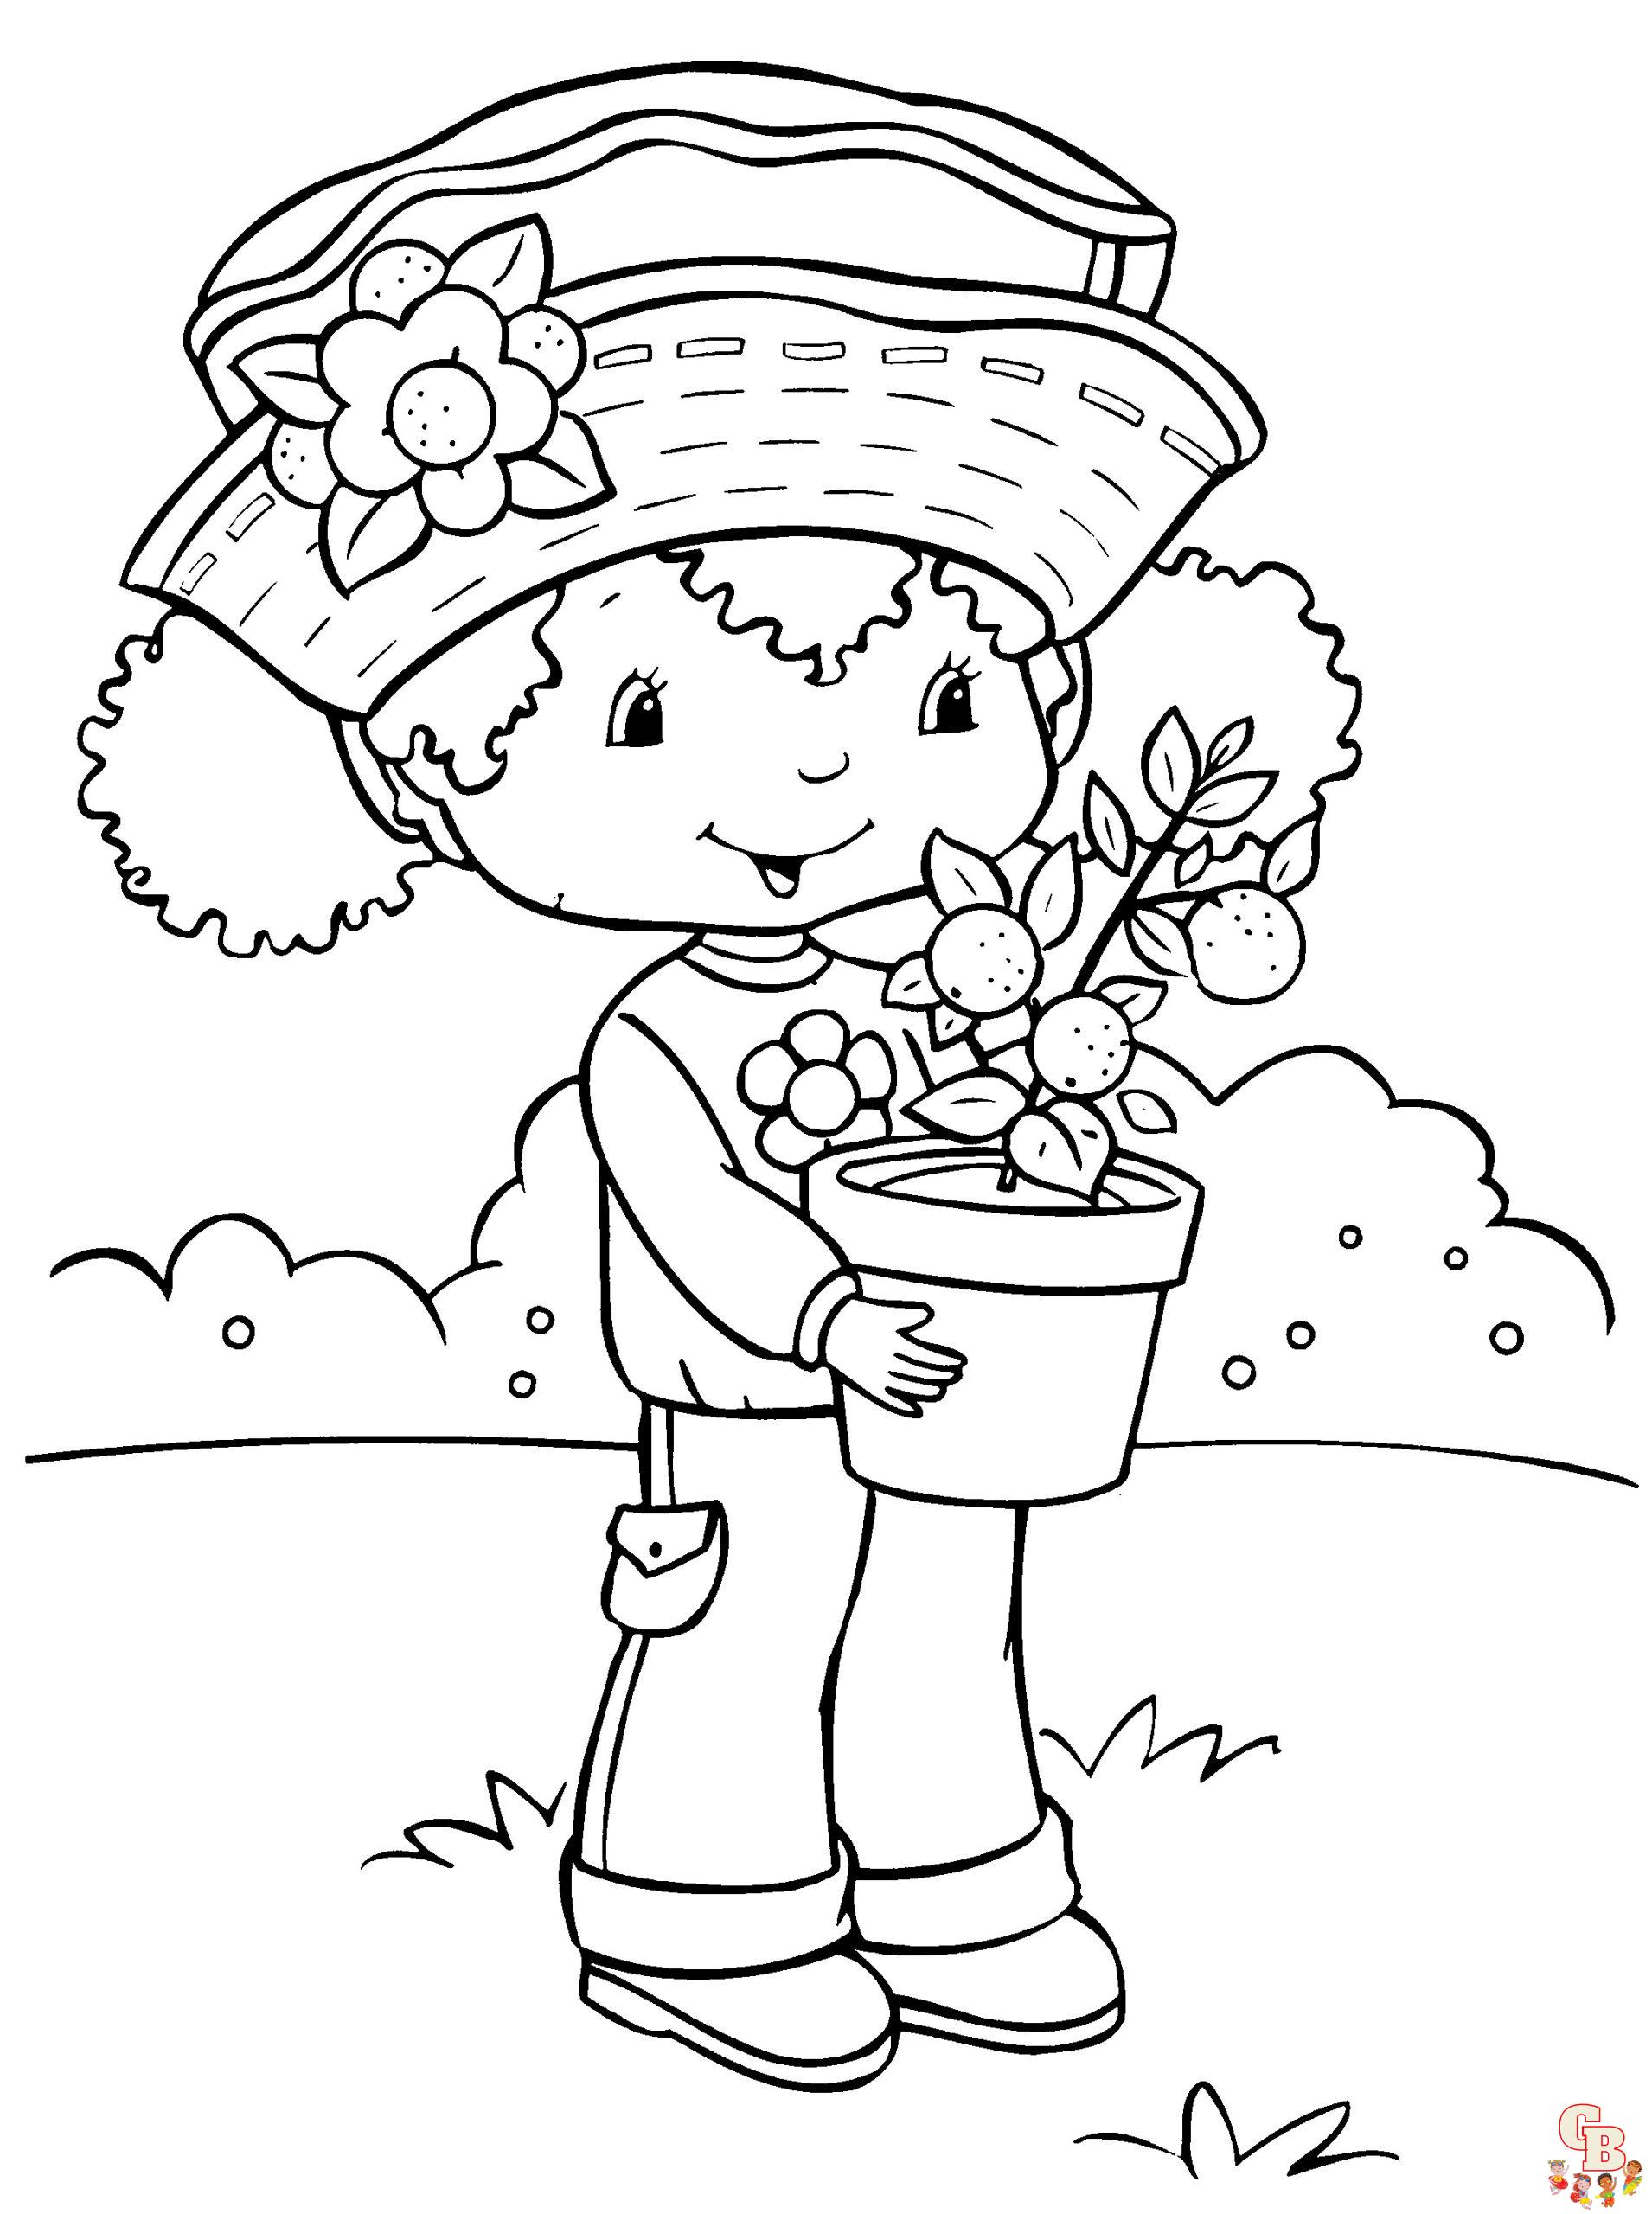 Free printable strawberry shortcake coloring pages for kids